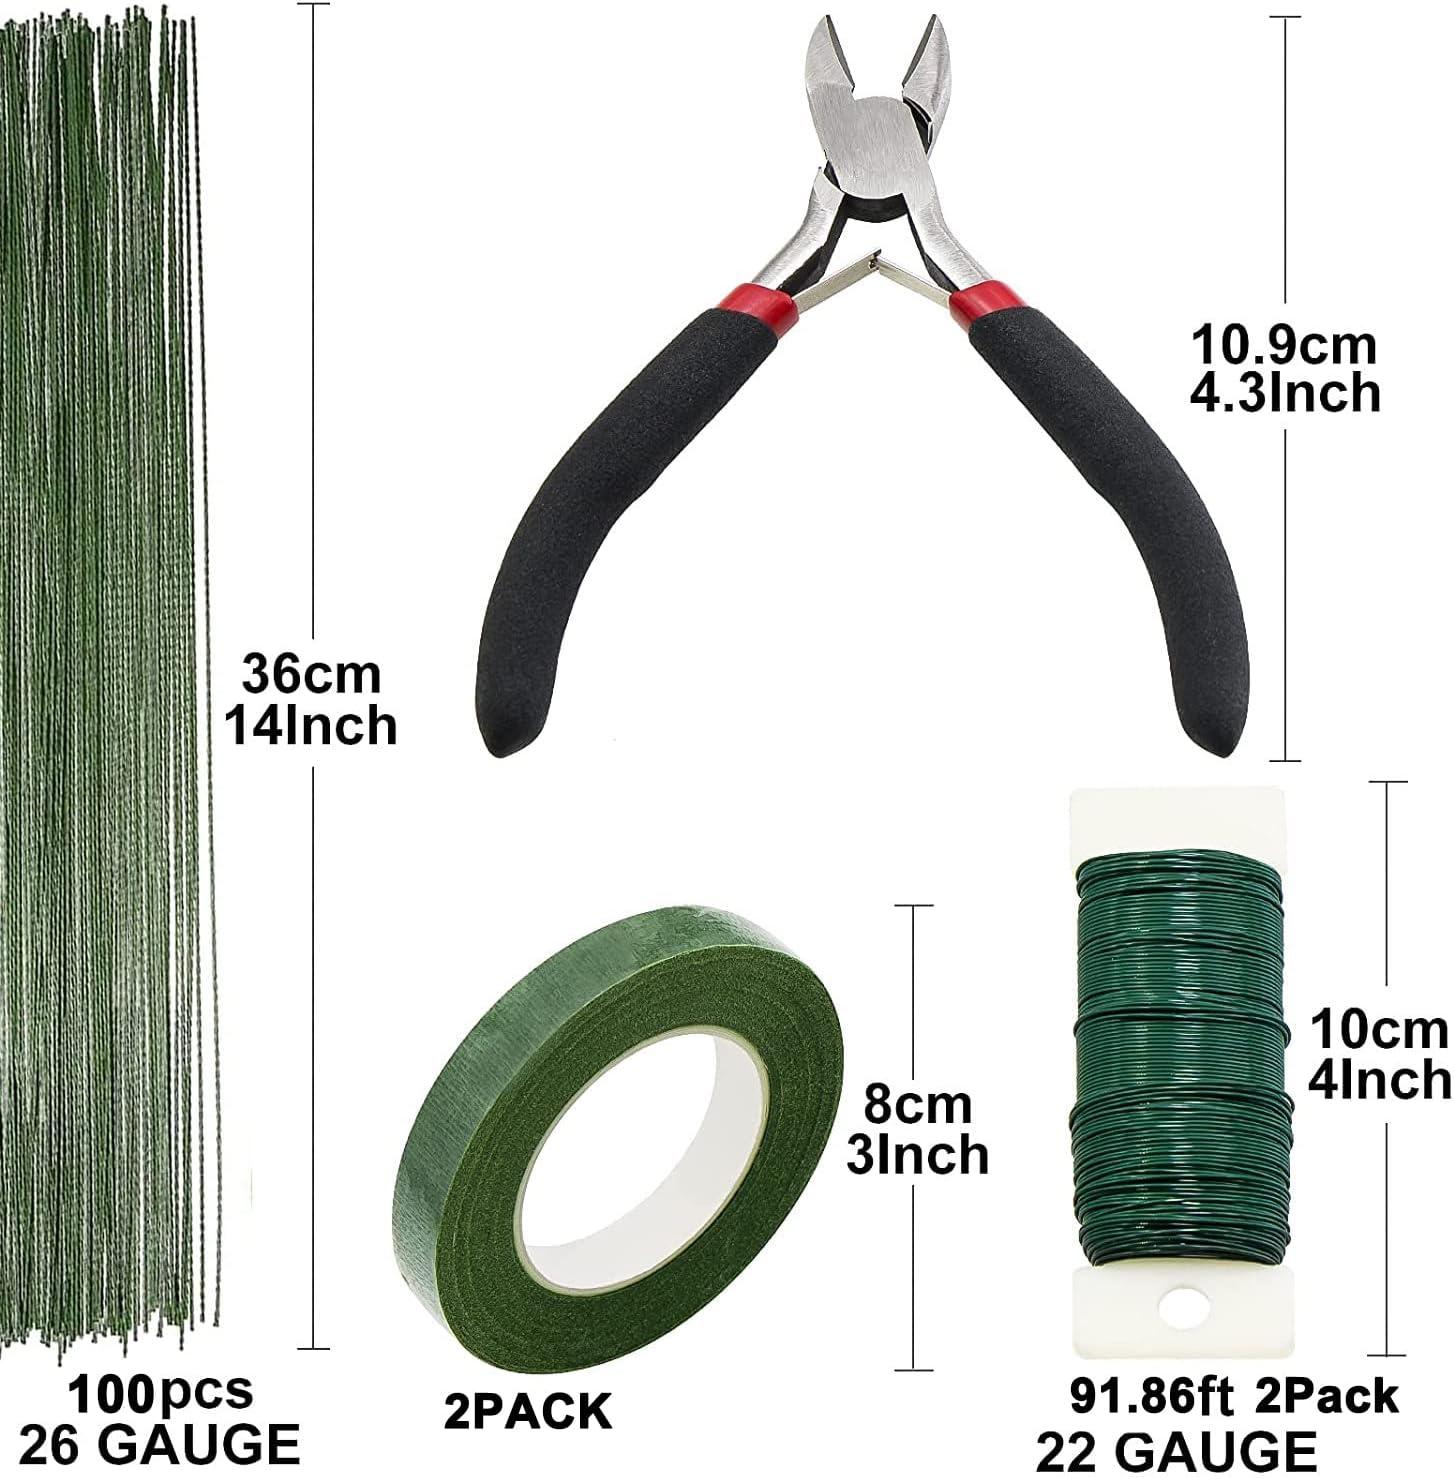 Pengxiaomei Floral Arrangement Kit, Floral Tape and Floral Wire with  Cutter,Green Floral Tape 22 Guage Floral Stem Wire 26 Gauge Green Floral  Wire for